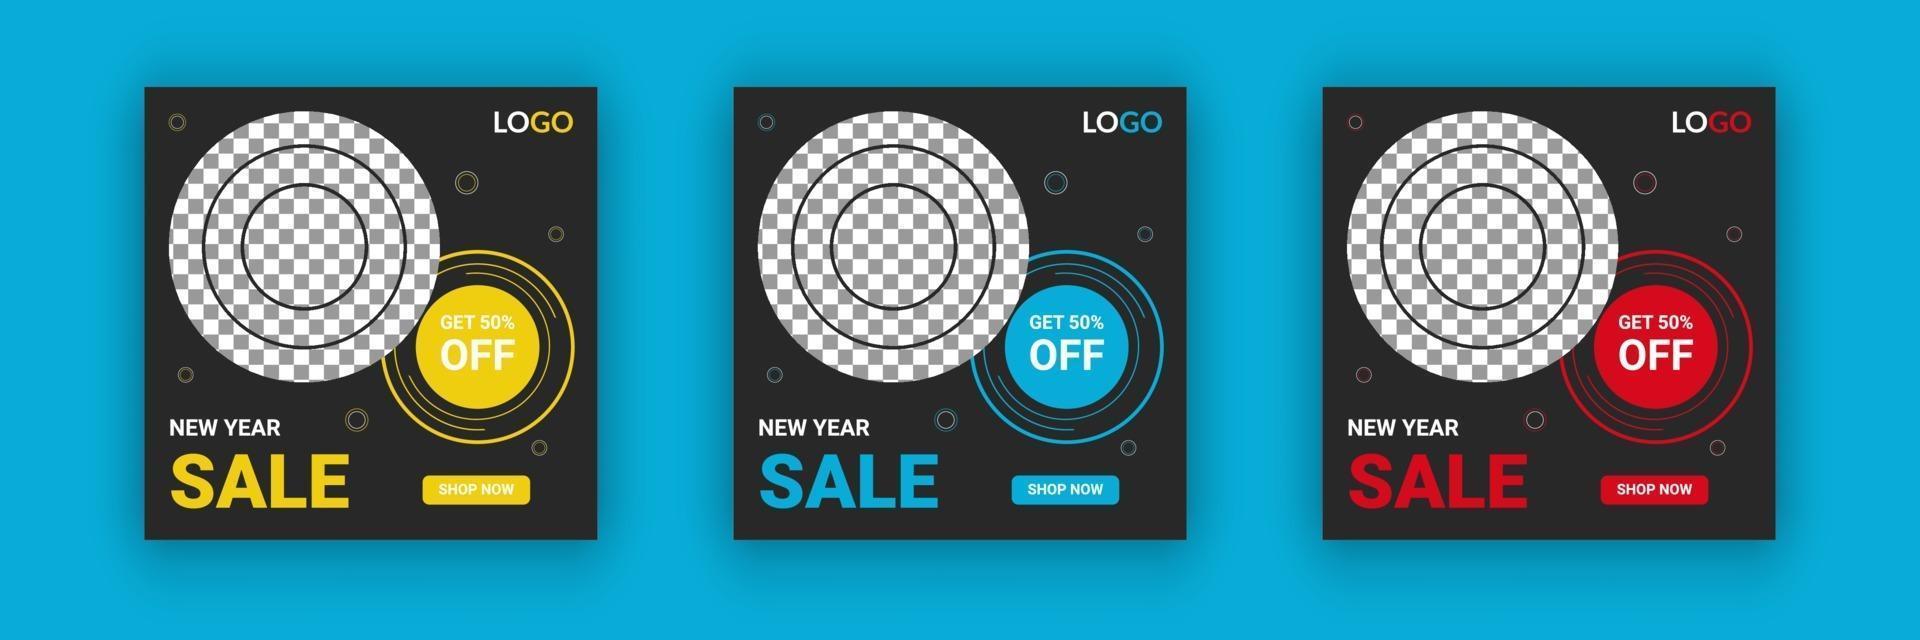 New year sale social media poste template vector